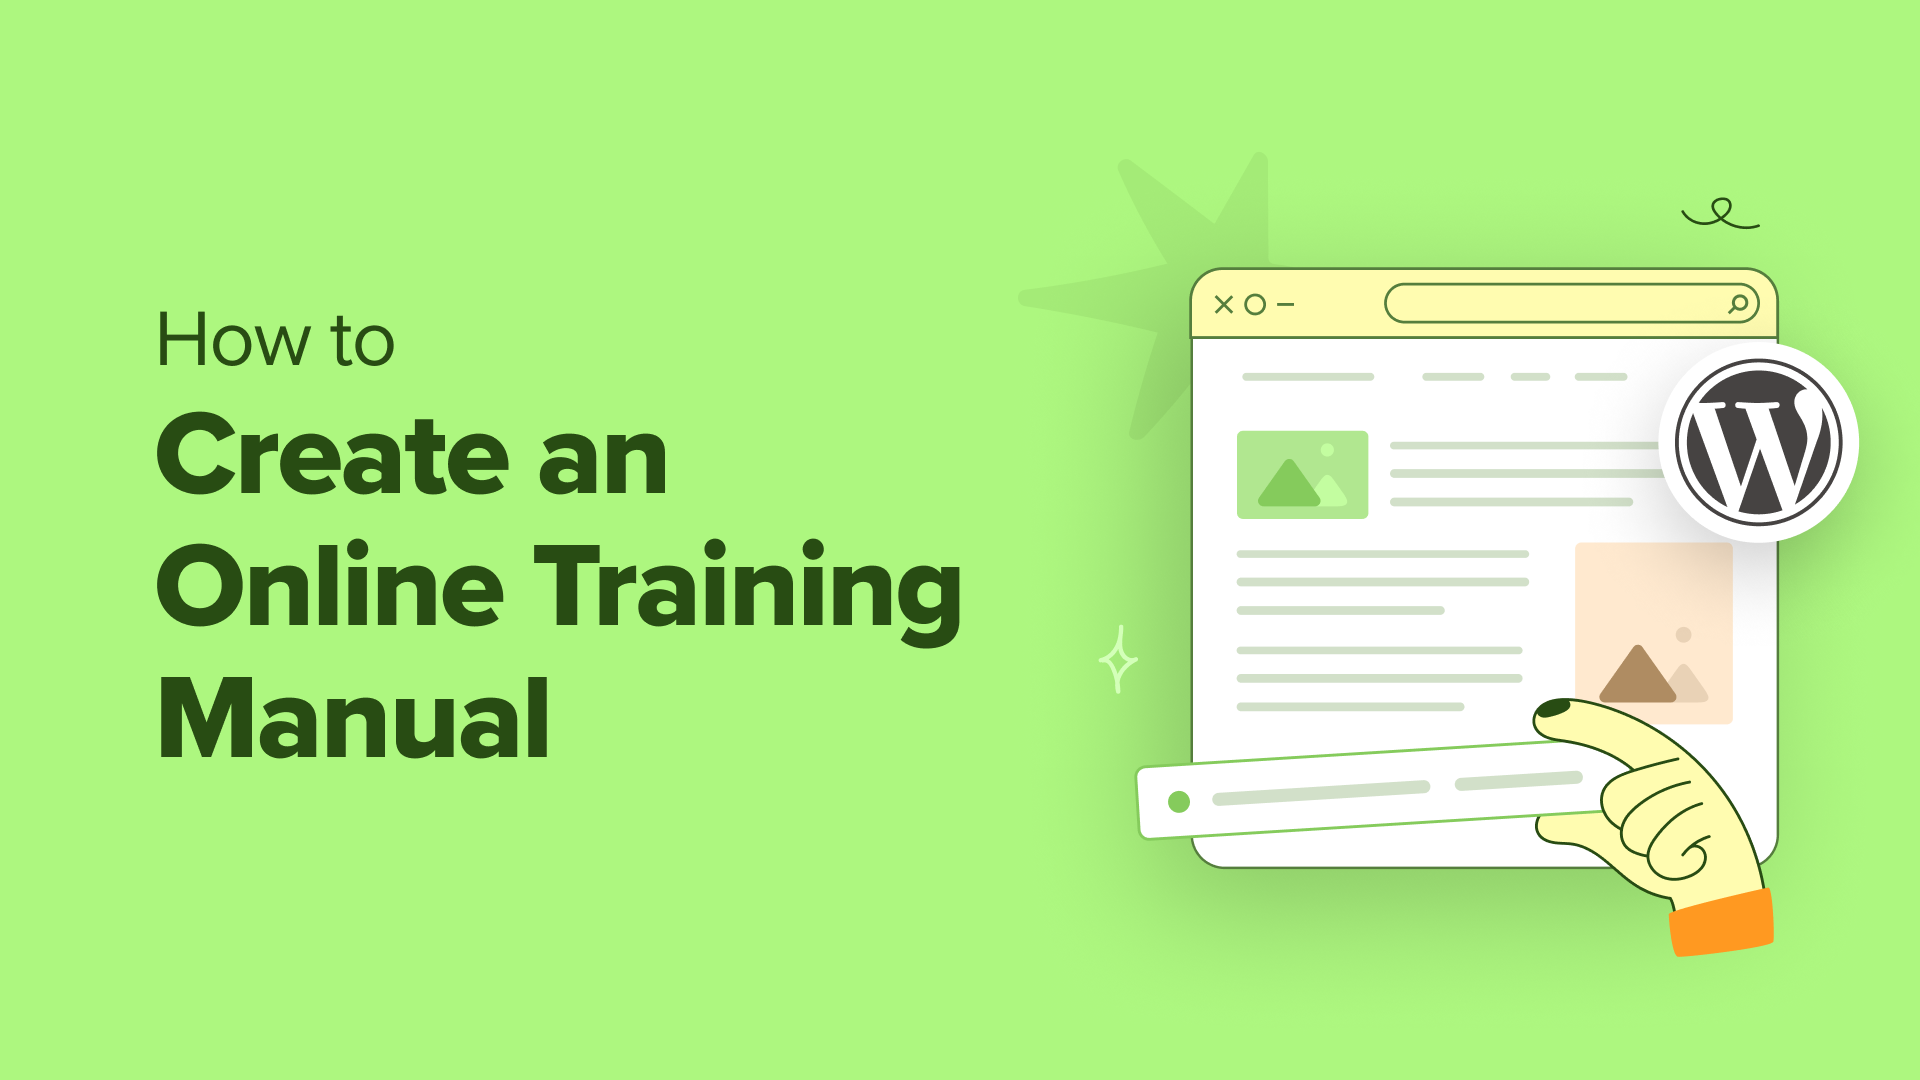 how to create an online training manual in wordpress